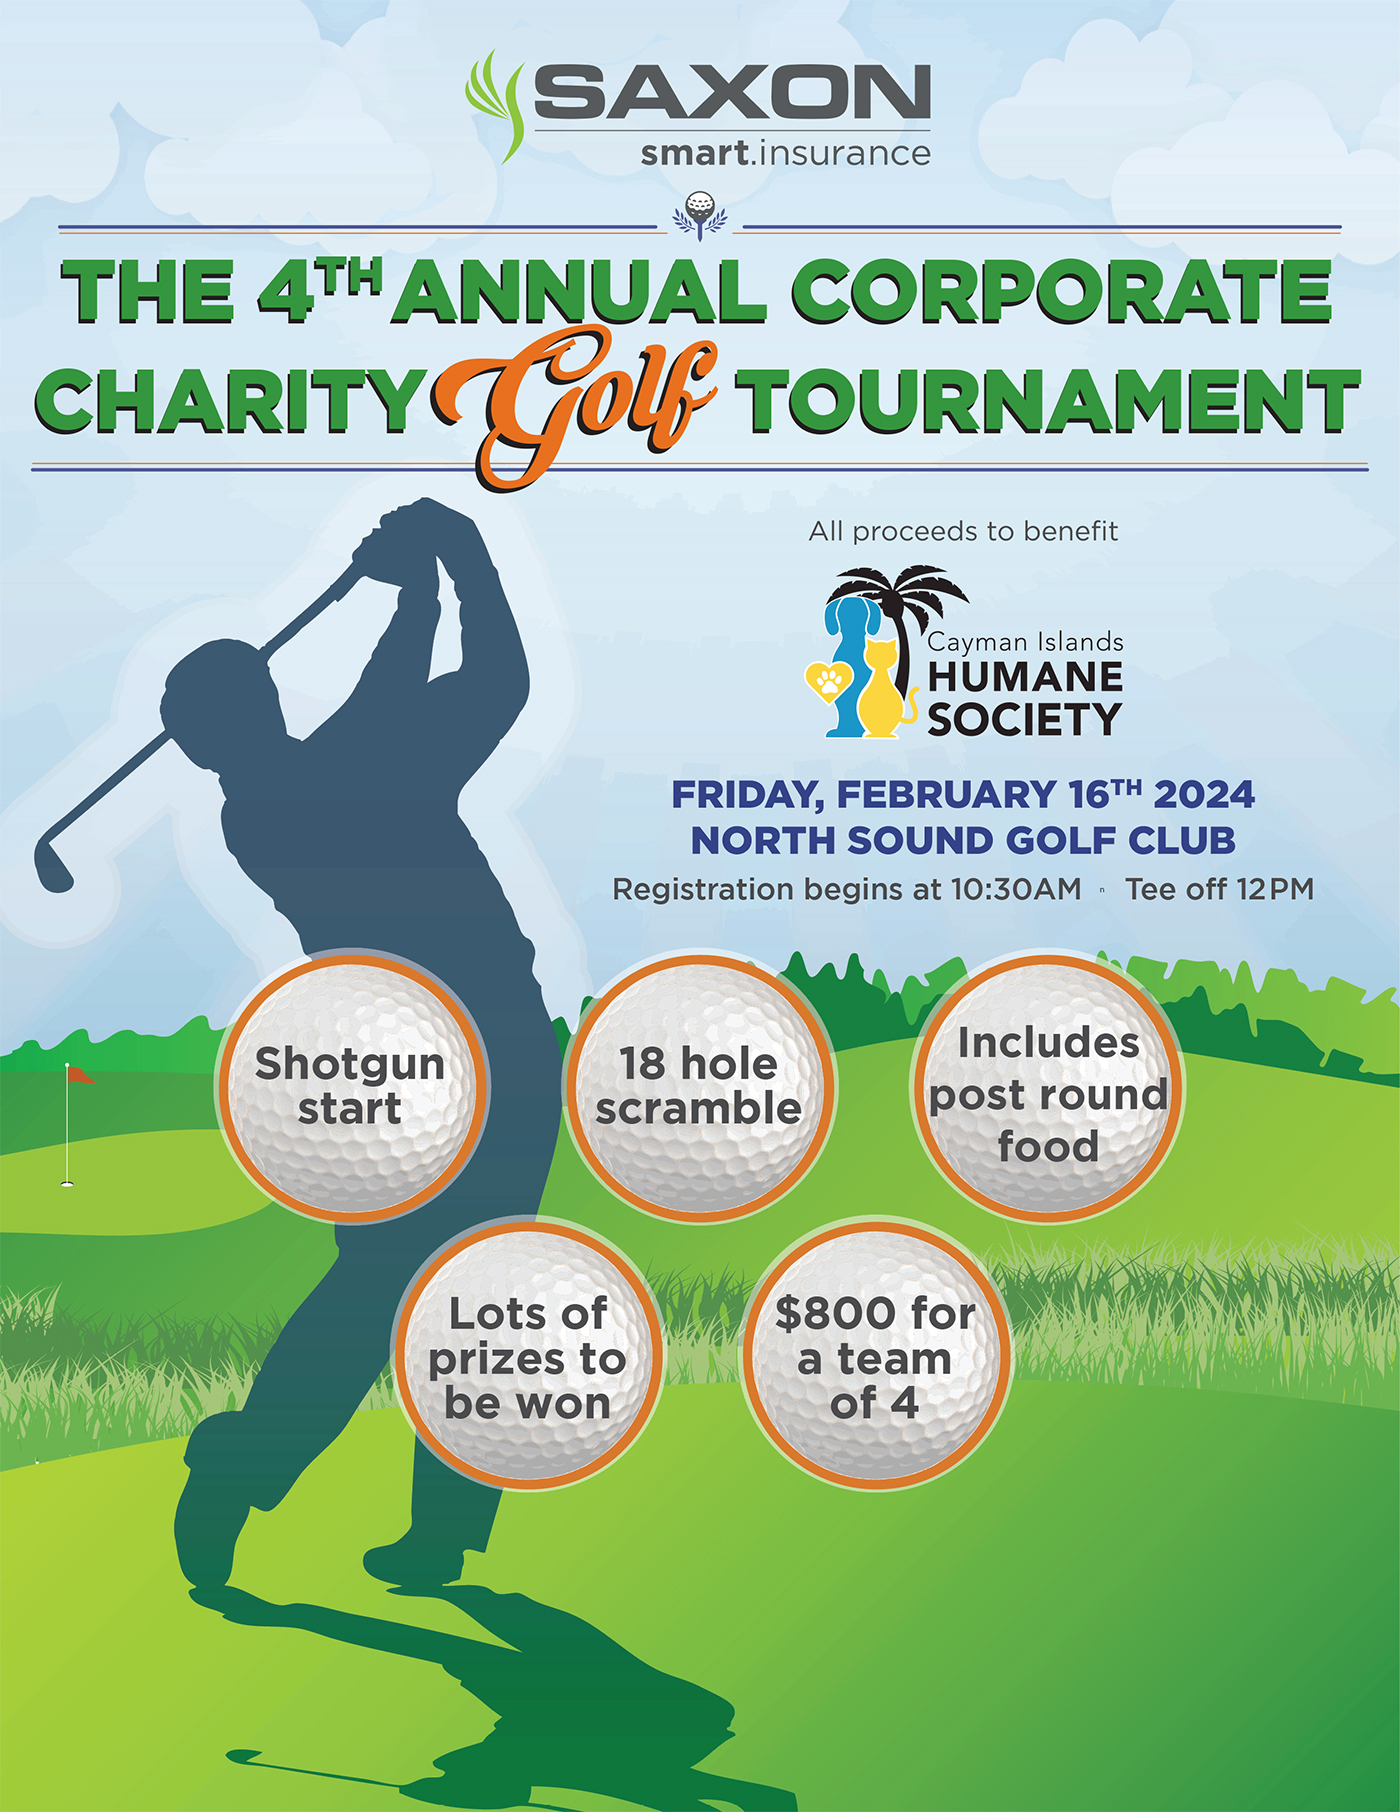 THE 4TH ANNUAL CORPORATE CHARITY GOLF TOURNAMENT (Date: Friday, February 16th 2024 Place: North Sound Golf Club)